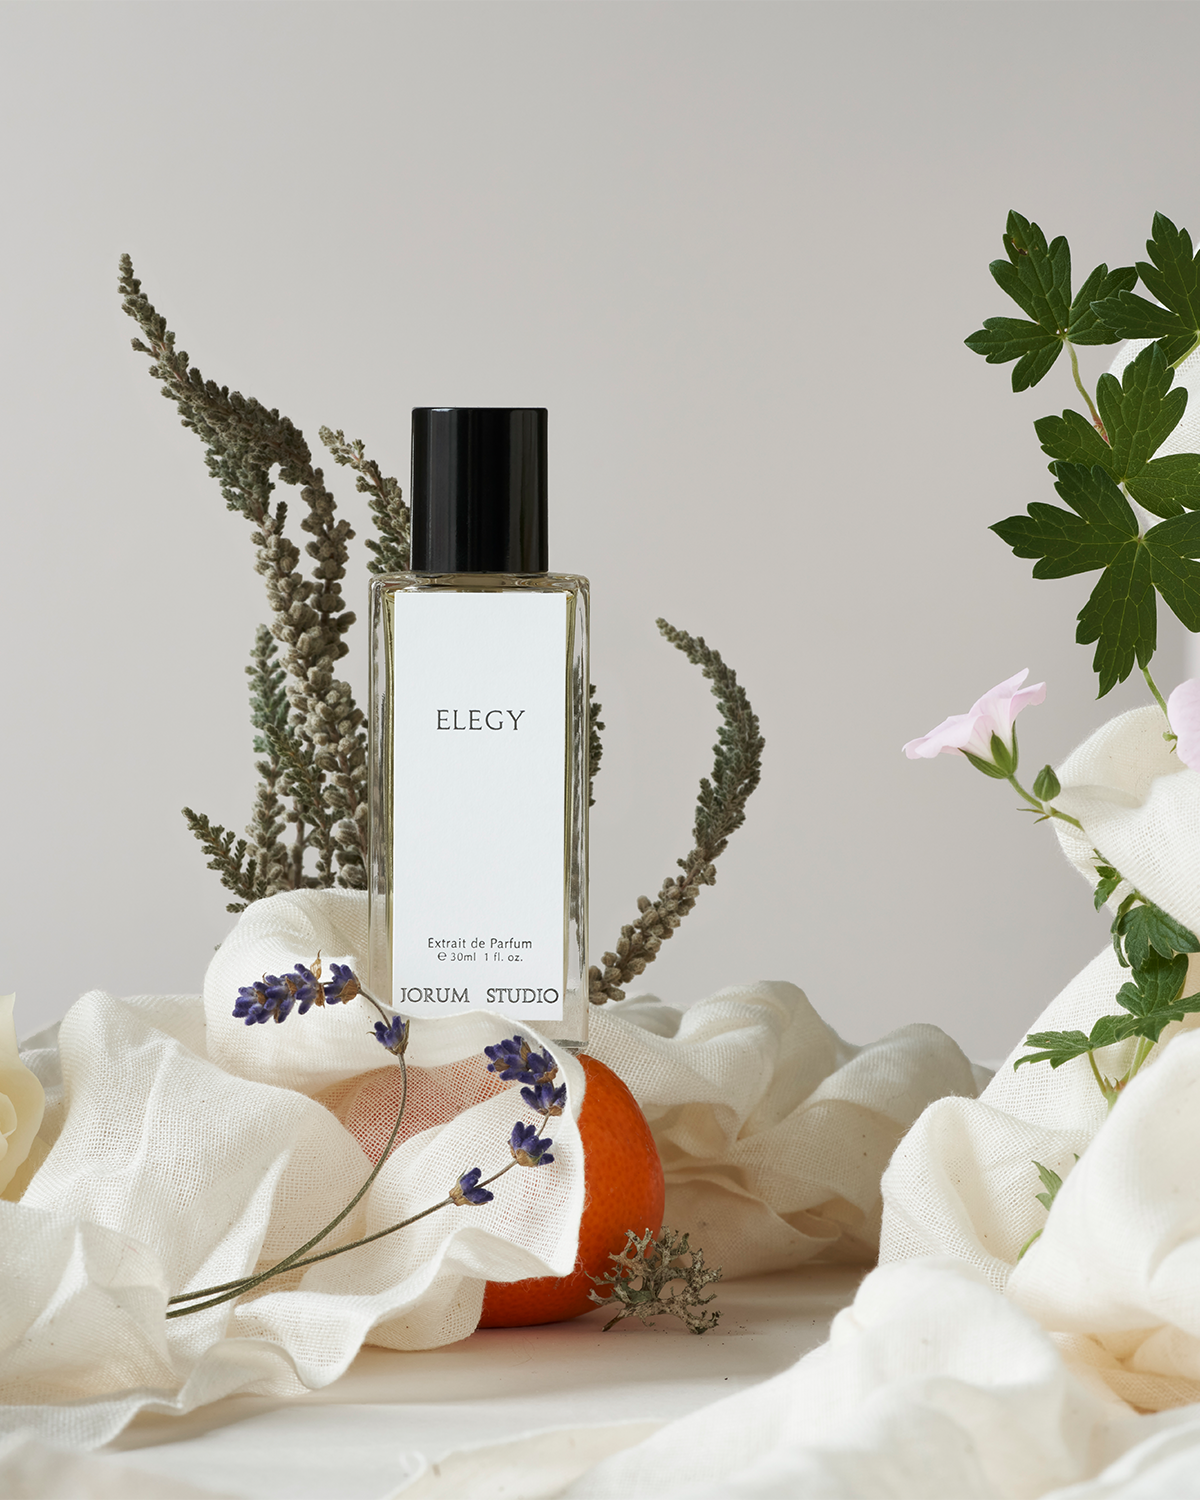 Jorum Studio Elegy perfume bottle arranged in a still-life featuring white fabric, lavender and heather flowers and an orange.